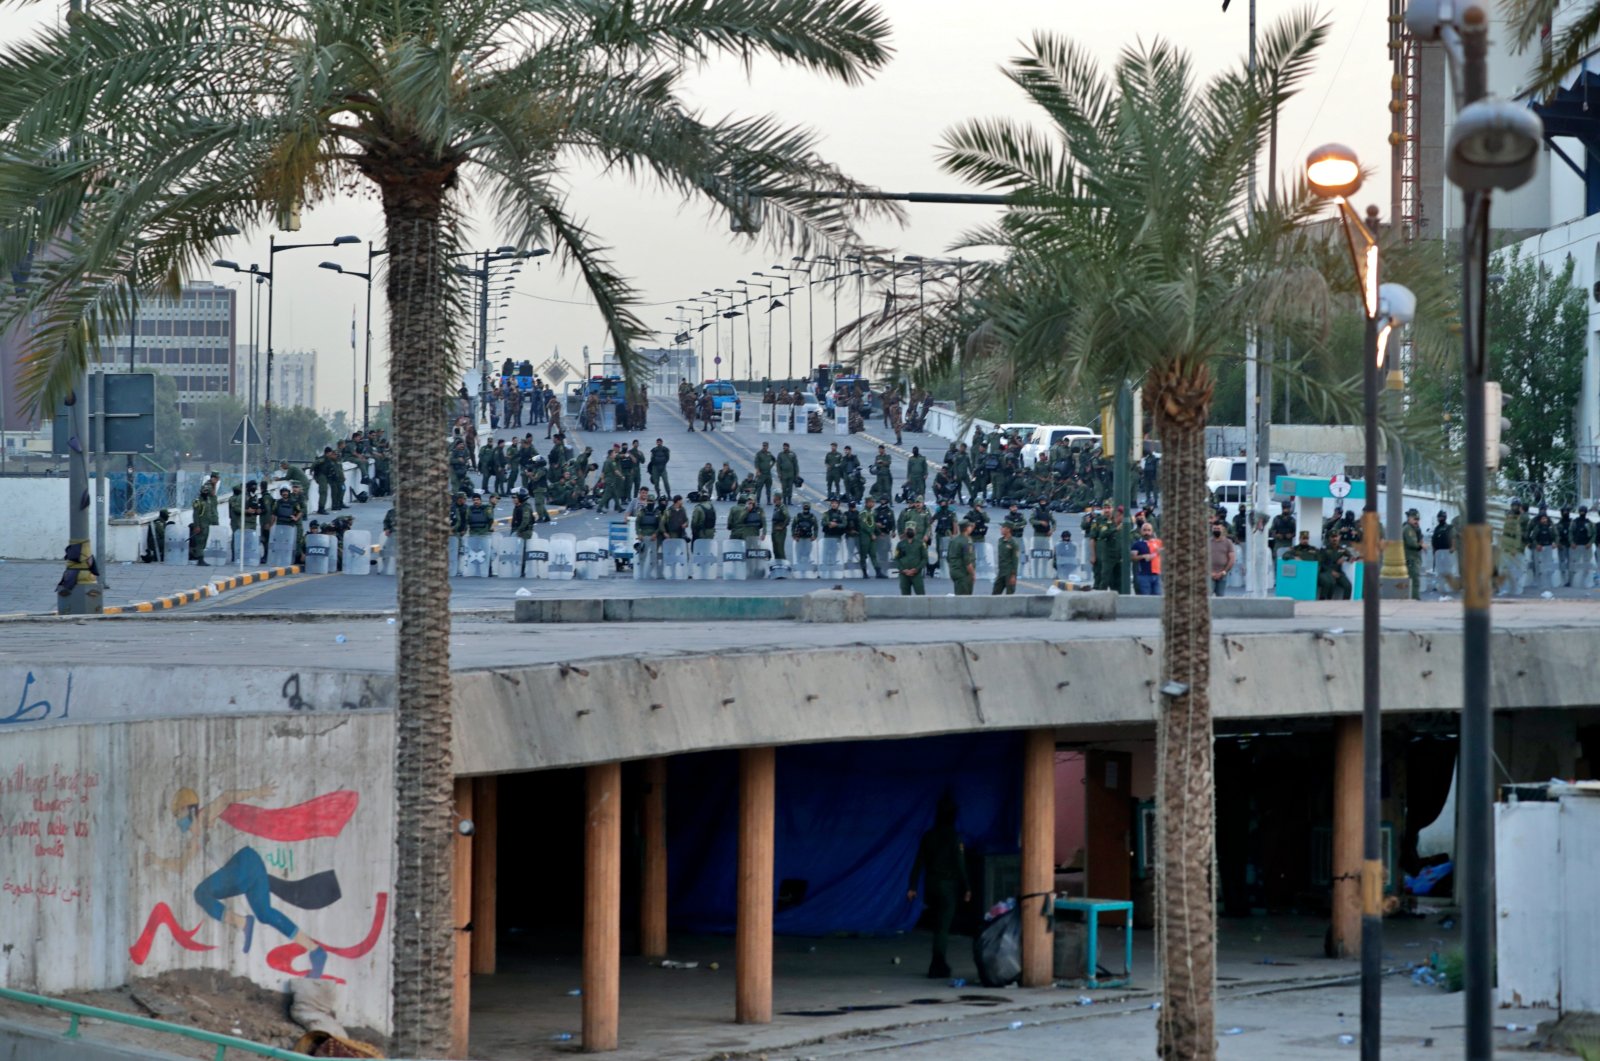 Security forces close the Joumhouriya Bridge that leads to the Green Zone government areas during a protest in Baghdad, Iraq, July 18, 2021. (AP Photo)